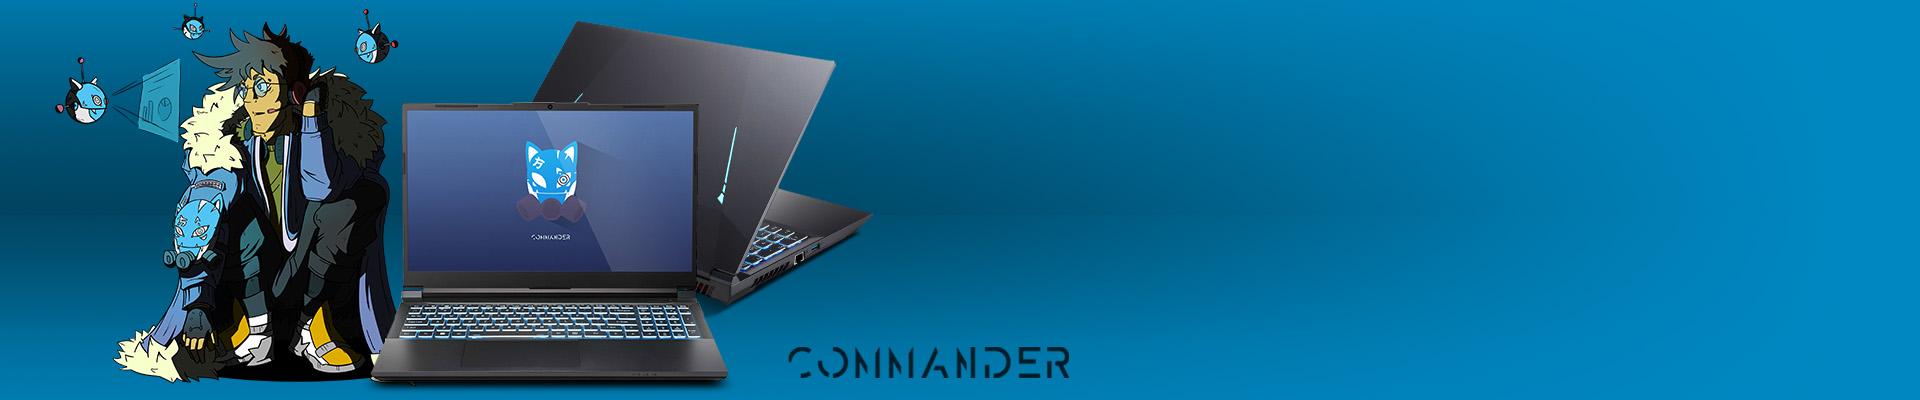 ONE GAMING Commander Laptop